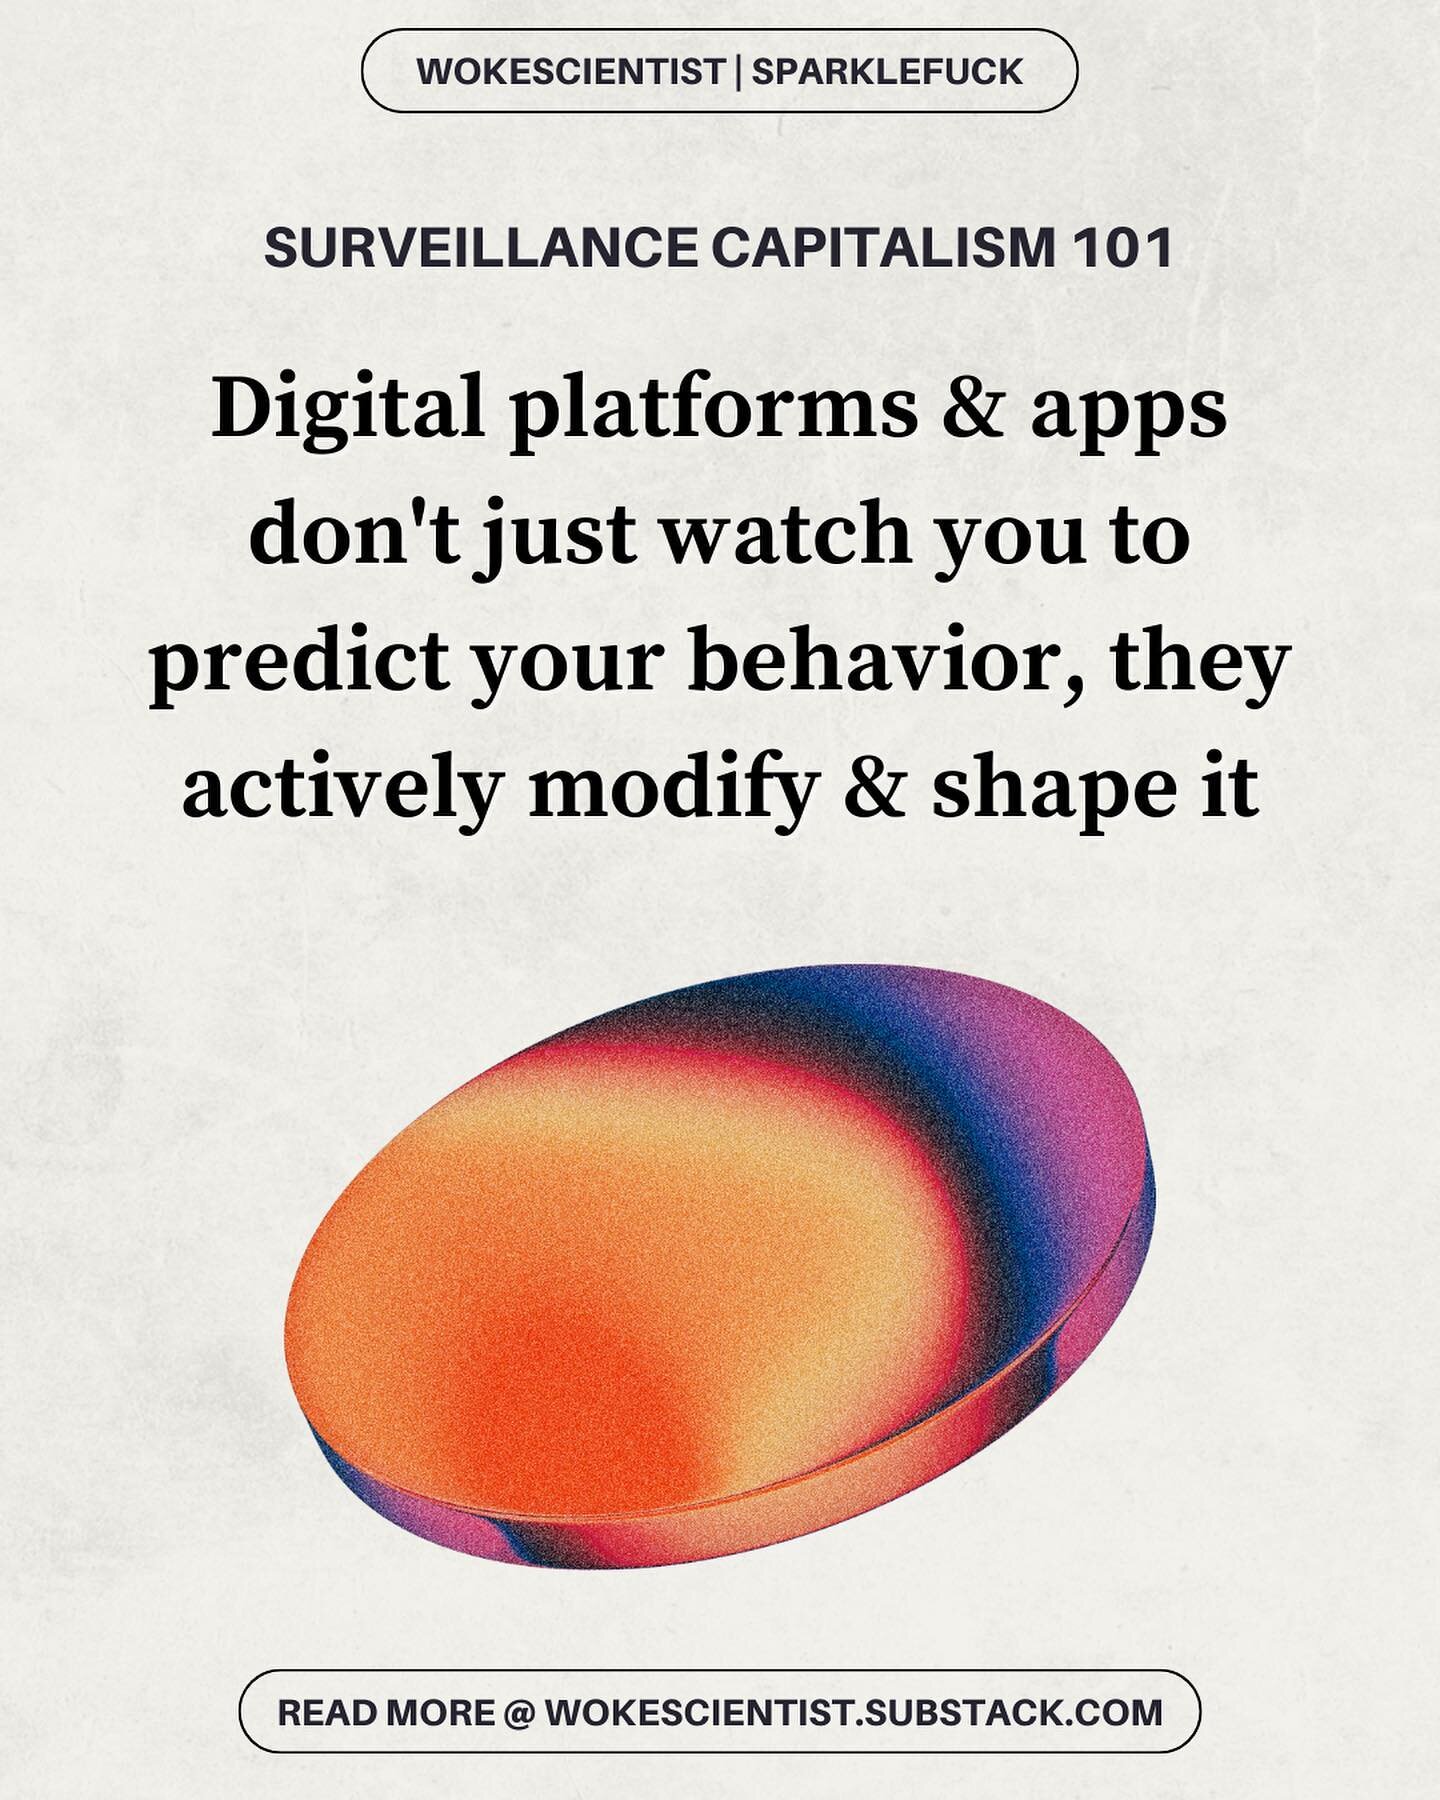 Last snippet of Part I of our collaborative series&mdash; Surveillance/ Digital Capitalism 101 &mdash; by me &amp; @sparkle_fuck 

Read full piece on ✨wokescientist.substack.com✨ 

Part II out Thursday!
&mdash;&mdash;&mdash;&mdash;&mdash;&mdash;

To 